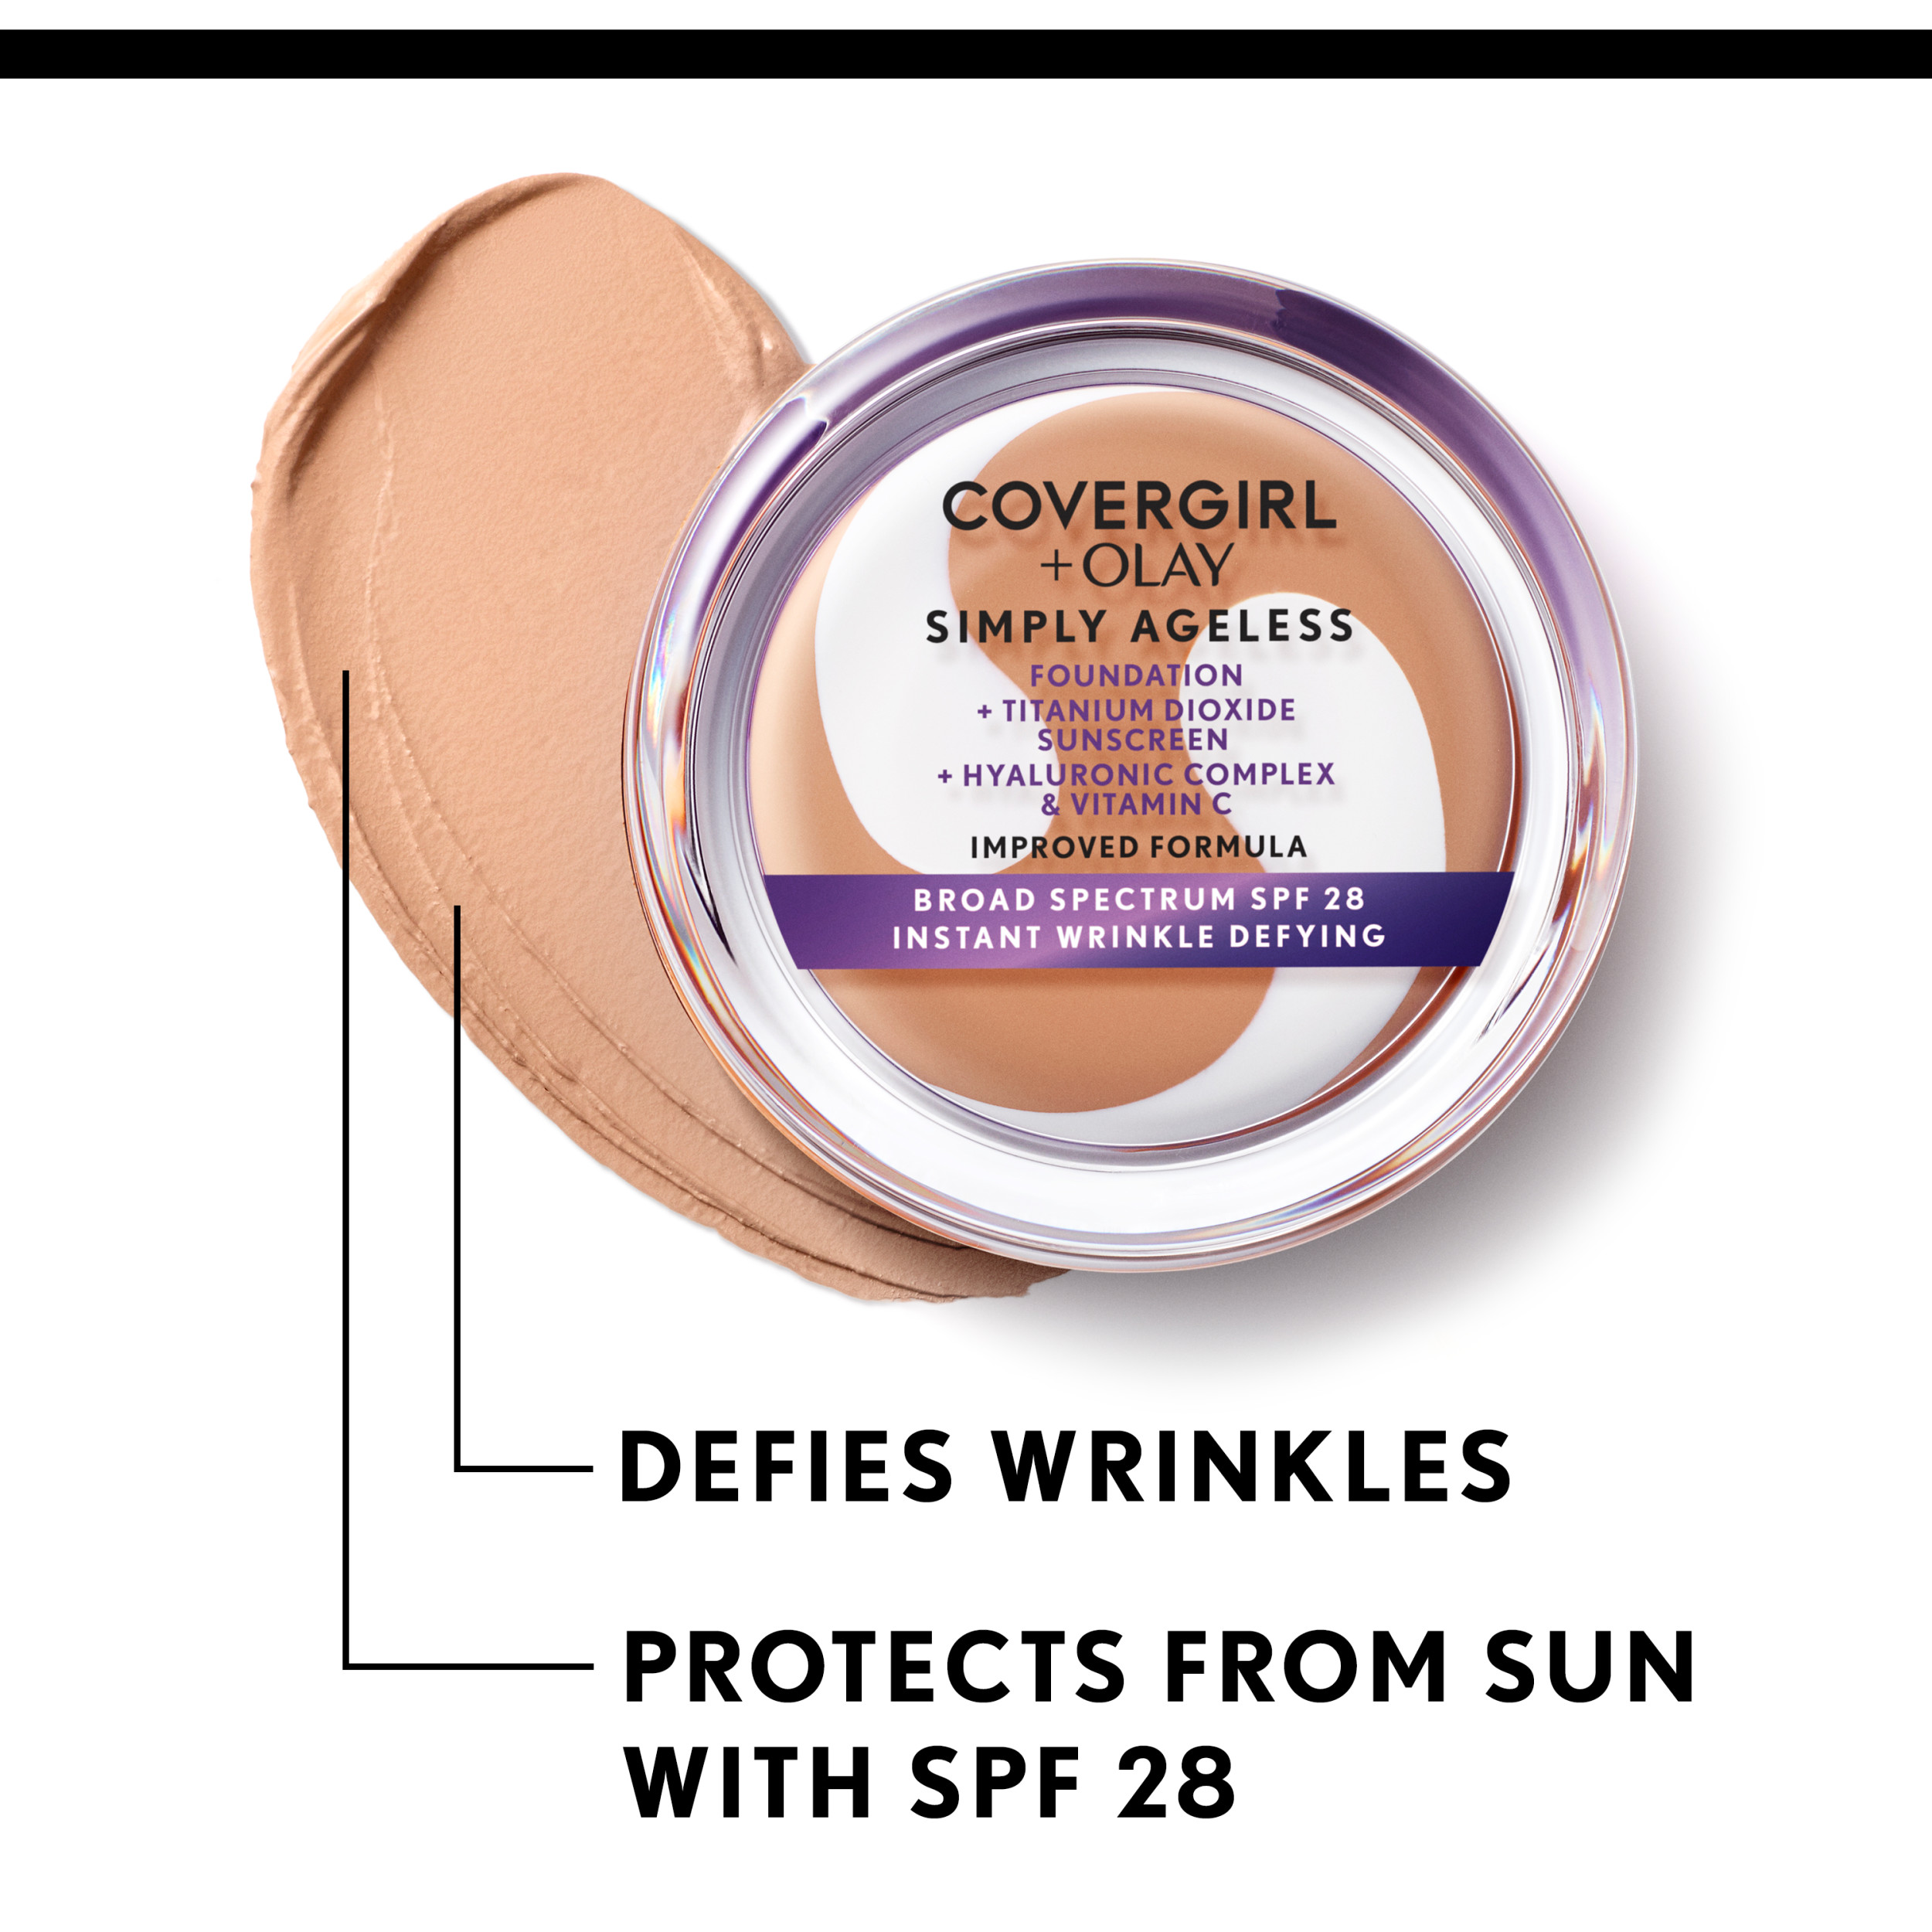 COVERGIRL + OLAY Simply Ageless Instant Wrinkle-Defying Foundation with SPF 28, Creamy Natural, 0.44 oz - image 4 of 9